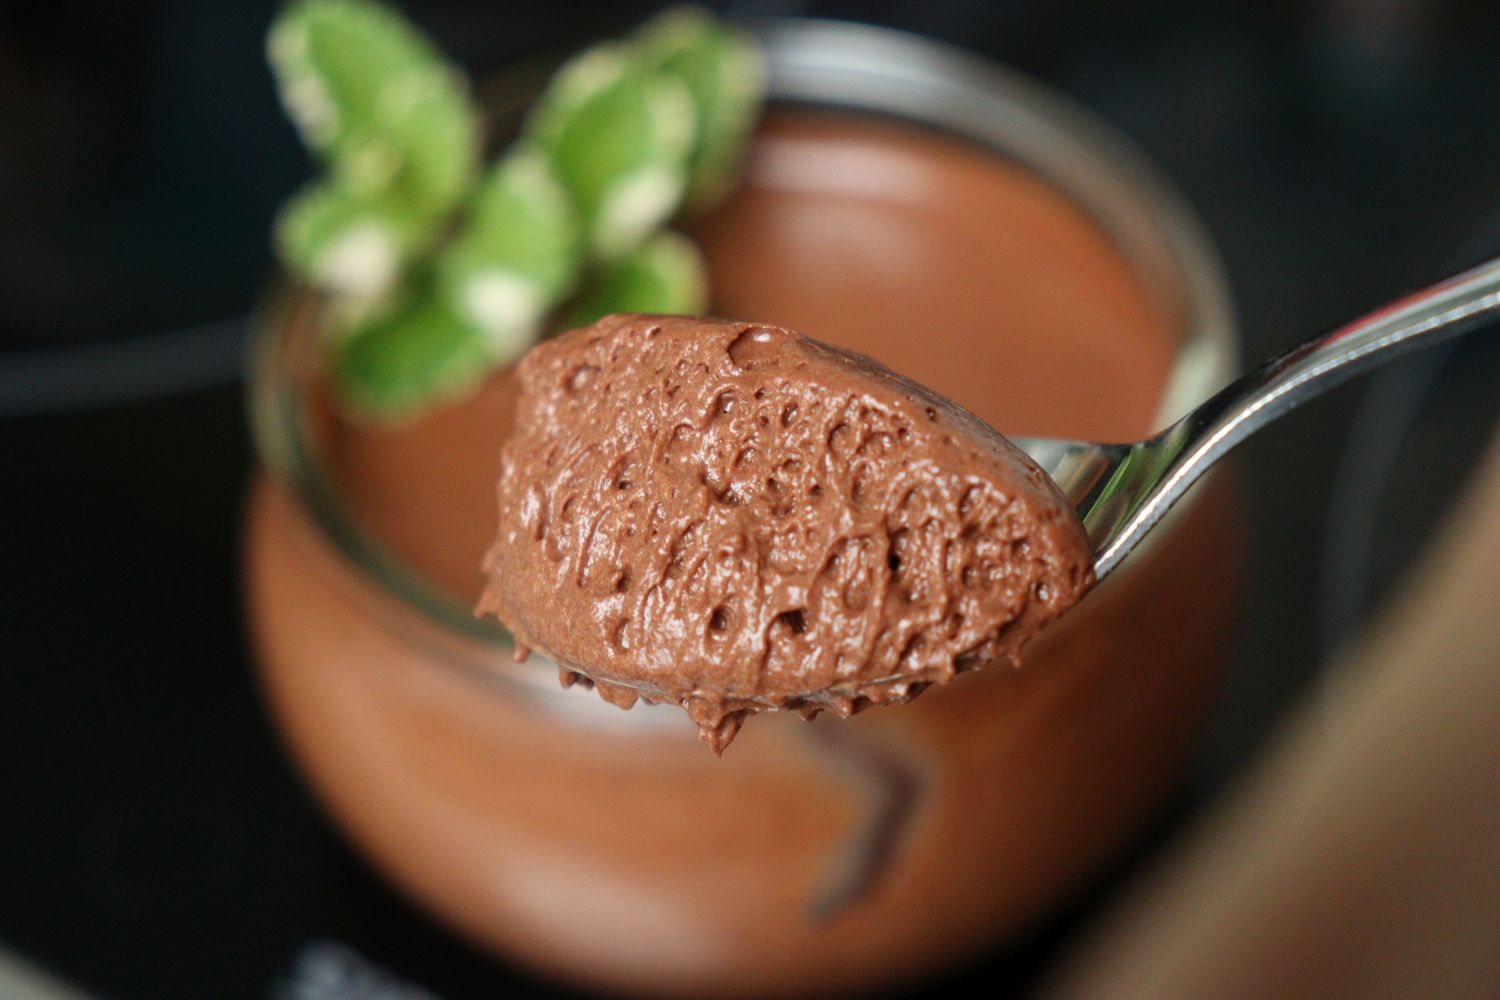 Nina Recipes - Chocolate Mousse (Mousse au chocolat): a spoonful of airy chocolate mousse served with fresh mint leaves